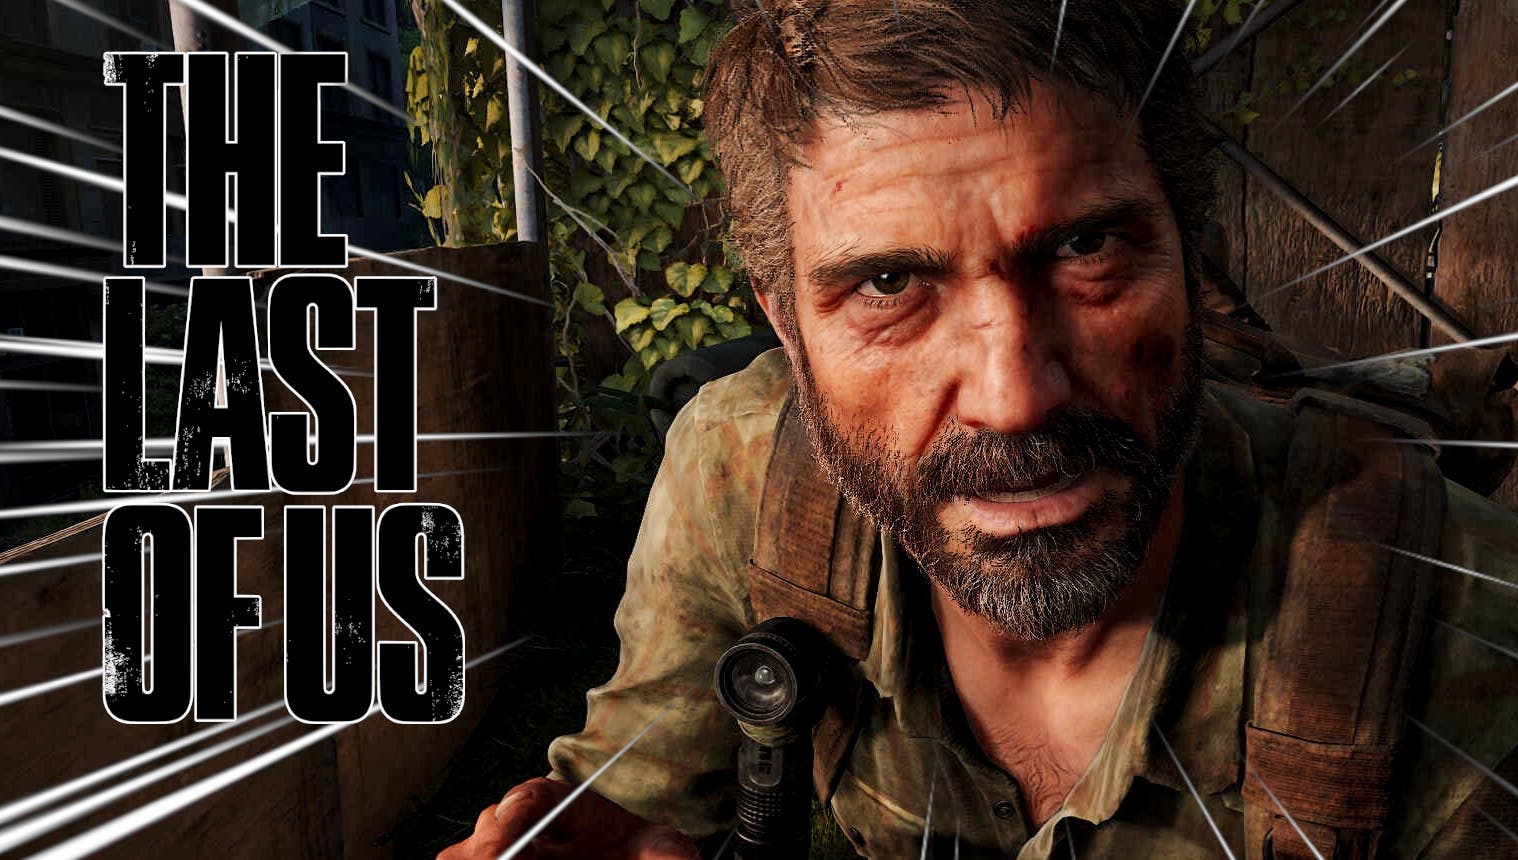 This is what The Last of Us would look like if it was a first-person game and I want it for yesterday